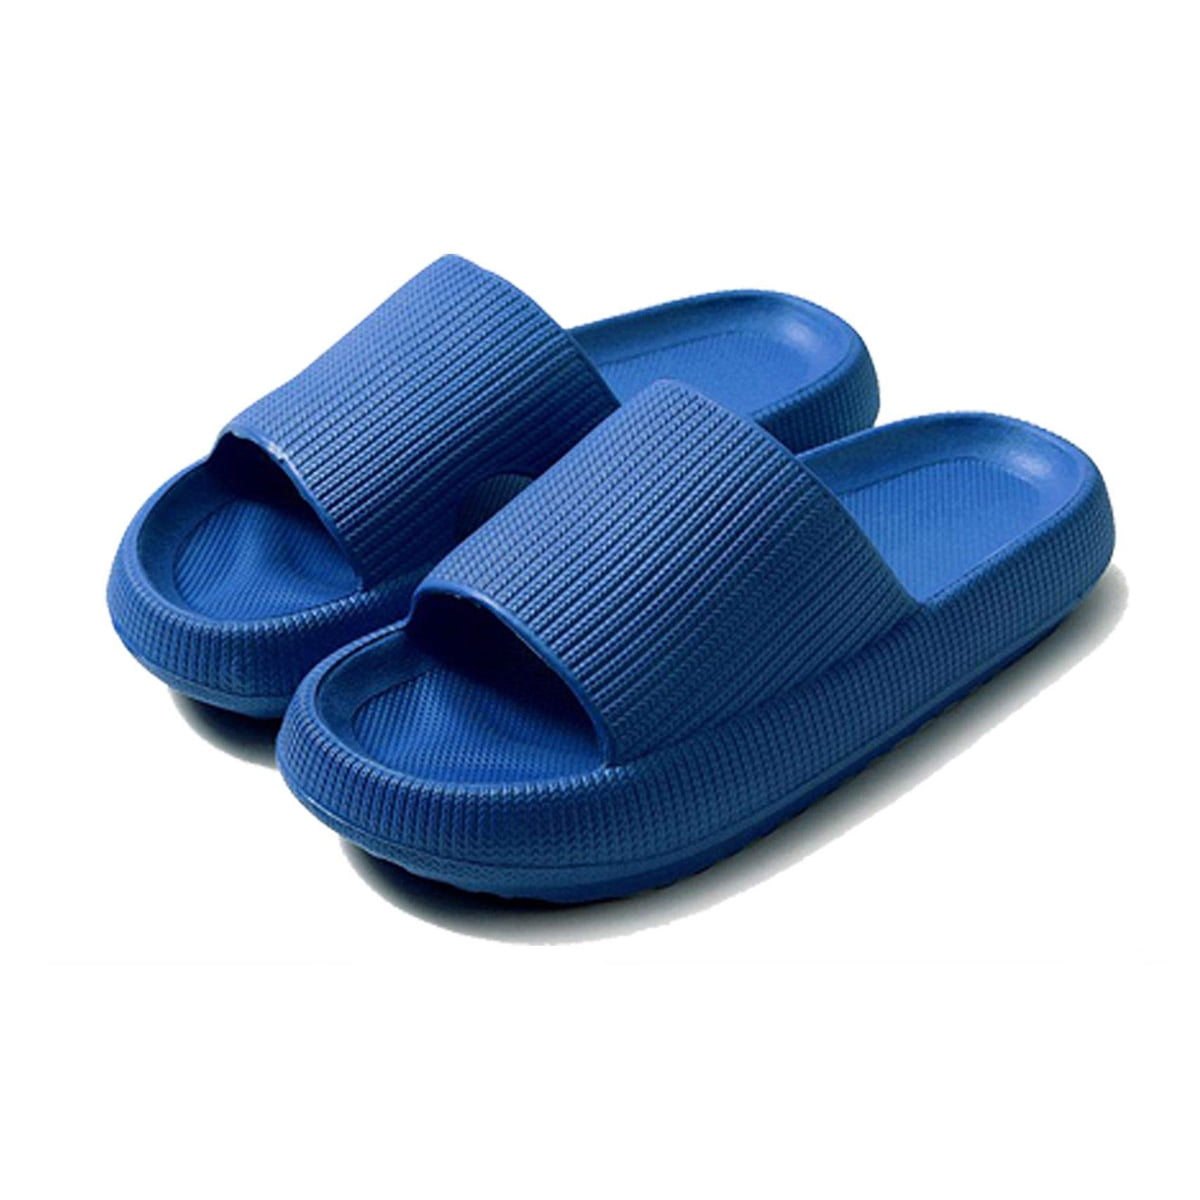 Pillow Slides Slippers Unisex Super Soft Home Slippers Beach Shoes Spa Bath Pool Gym Slides for Women and Men Massage Foam Bathroom Slippers,Non-Slip Thick Sole Quick Dry Shower Slippers 